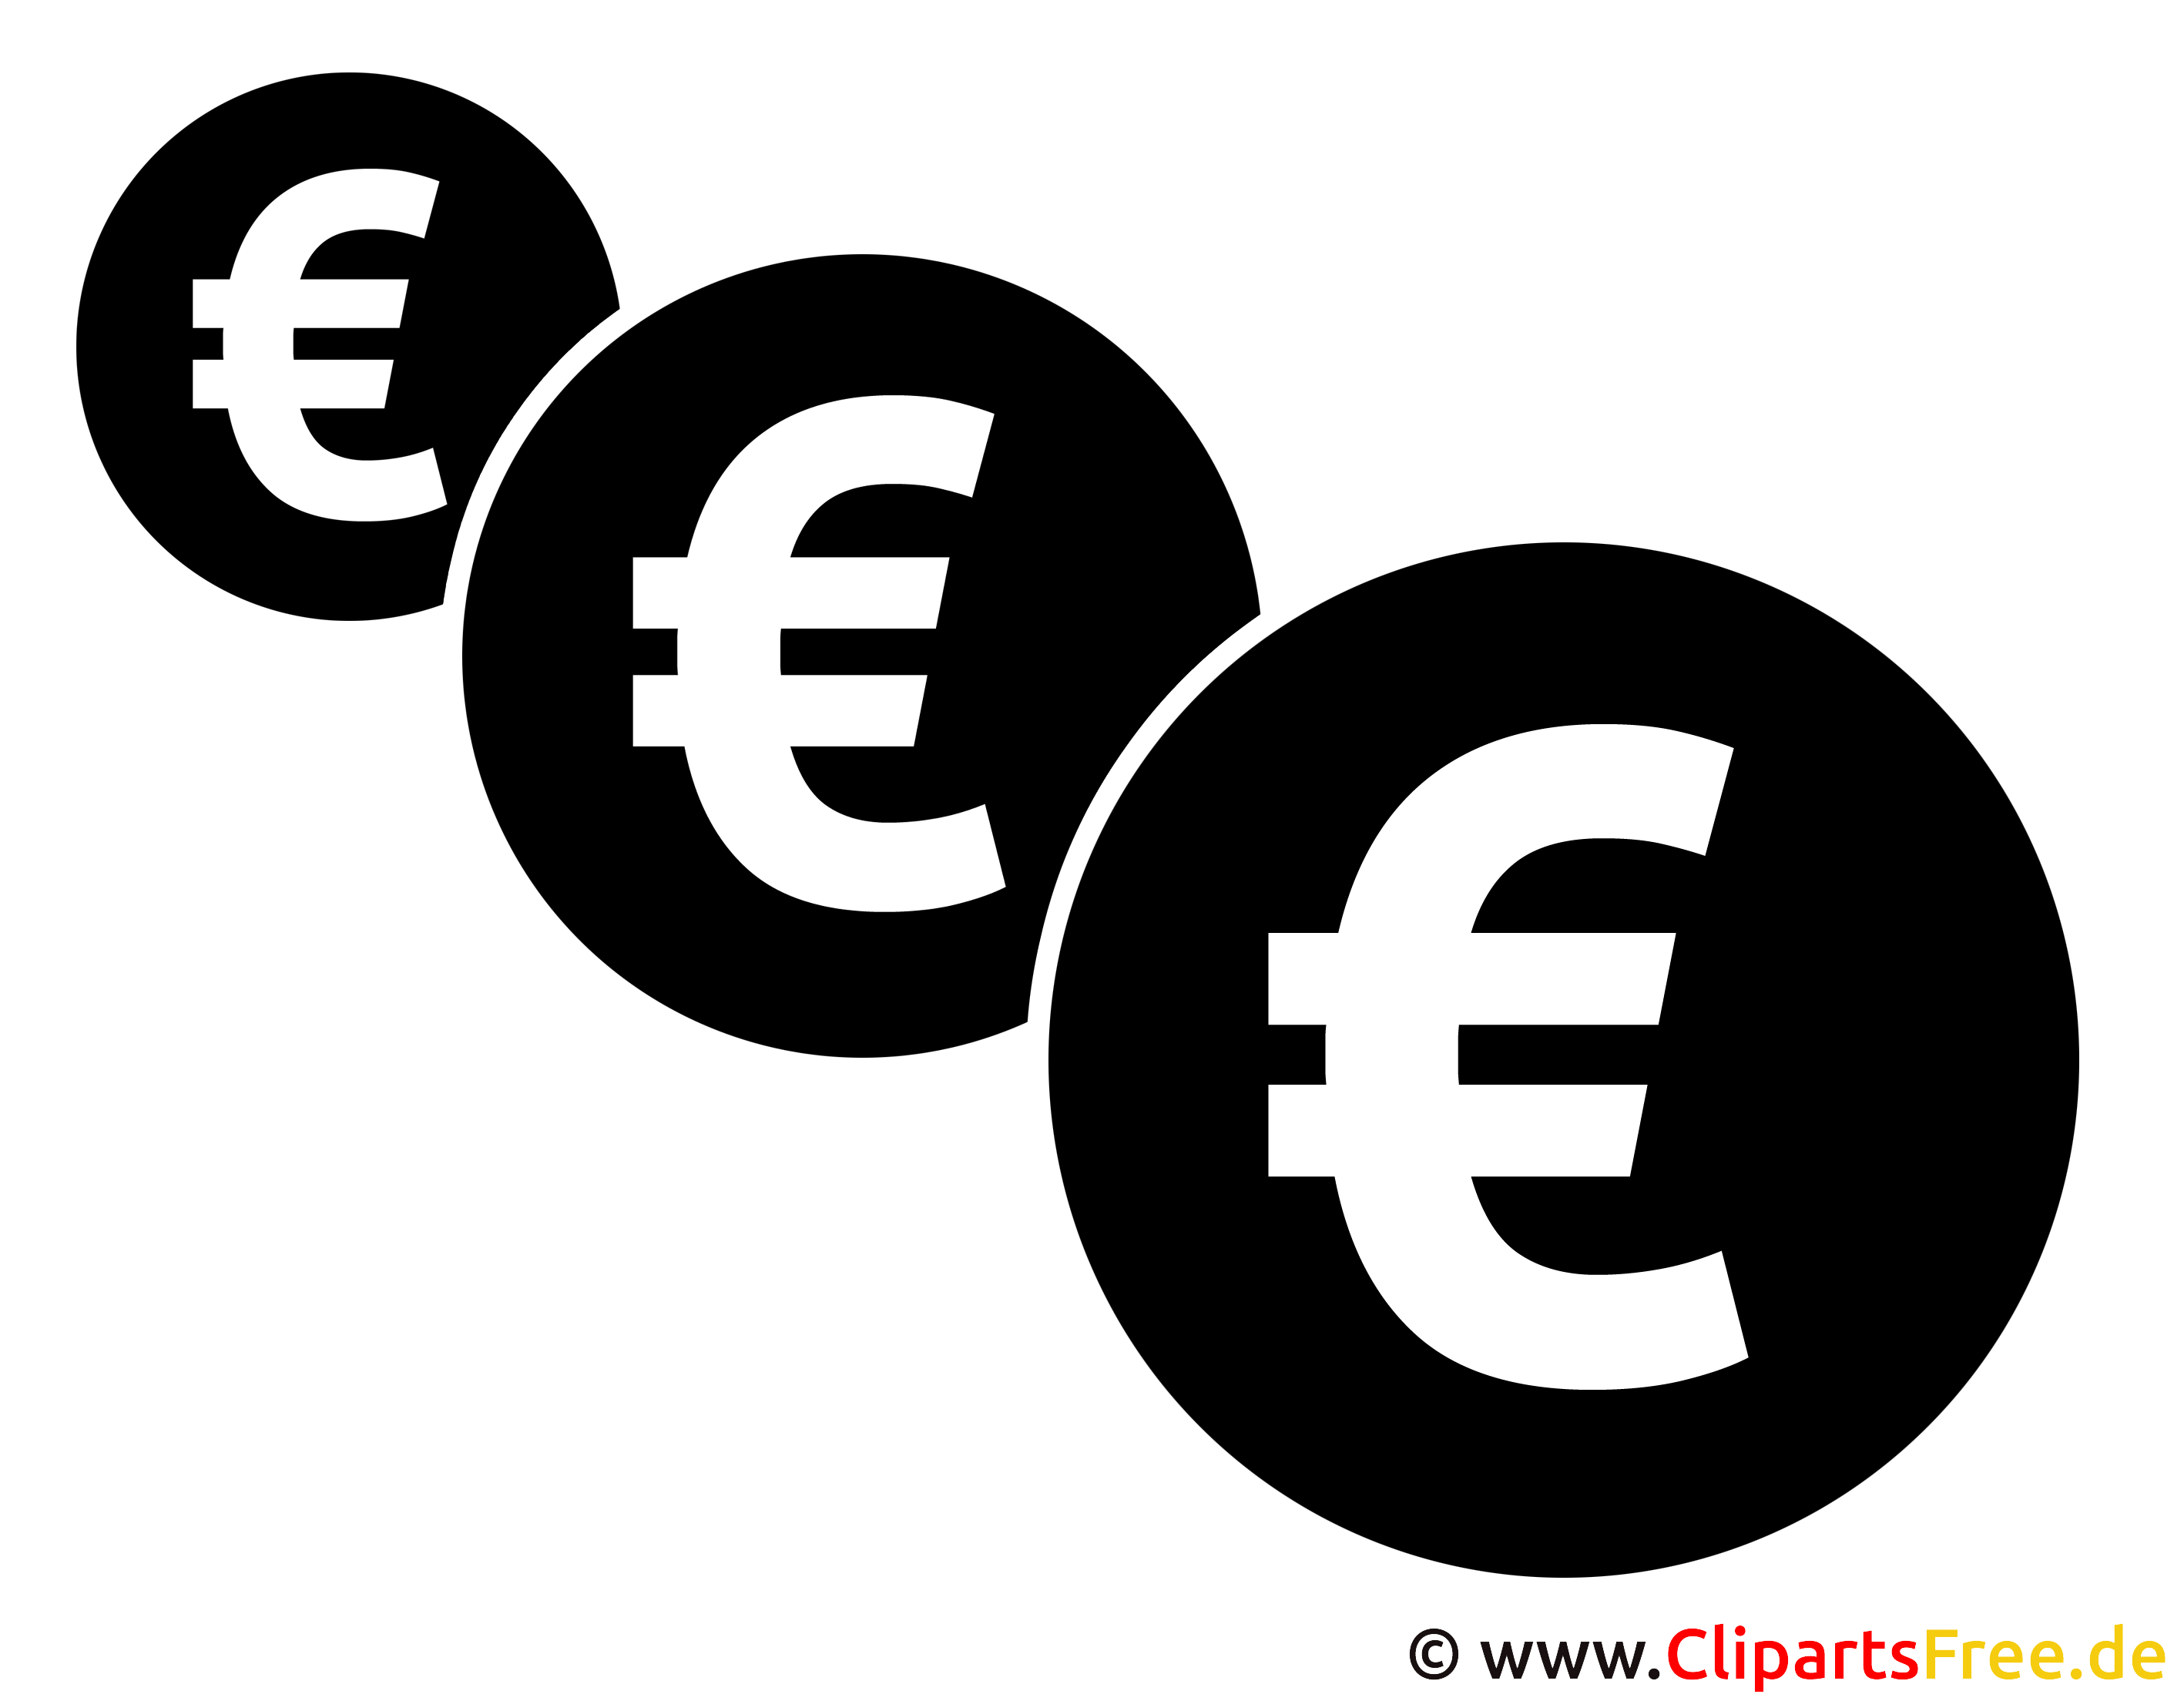 clipart of euro - photo #20